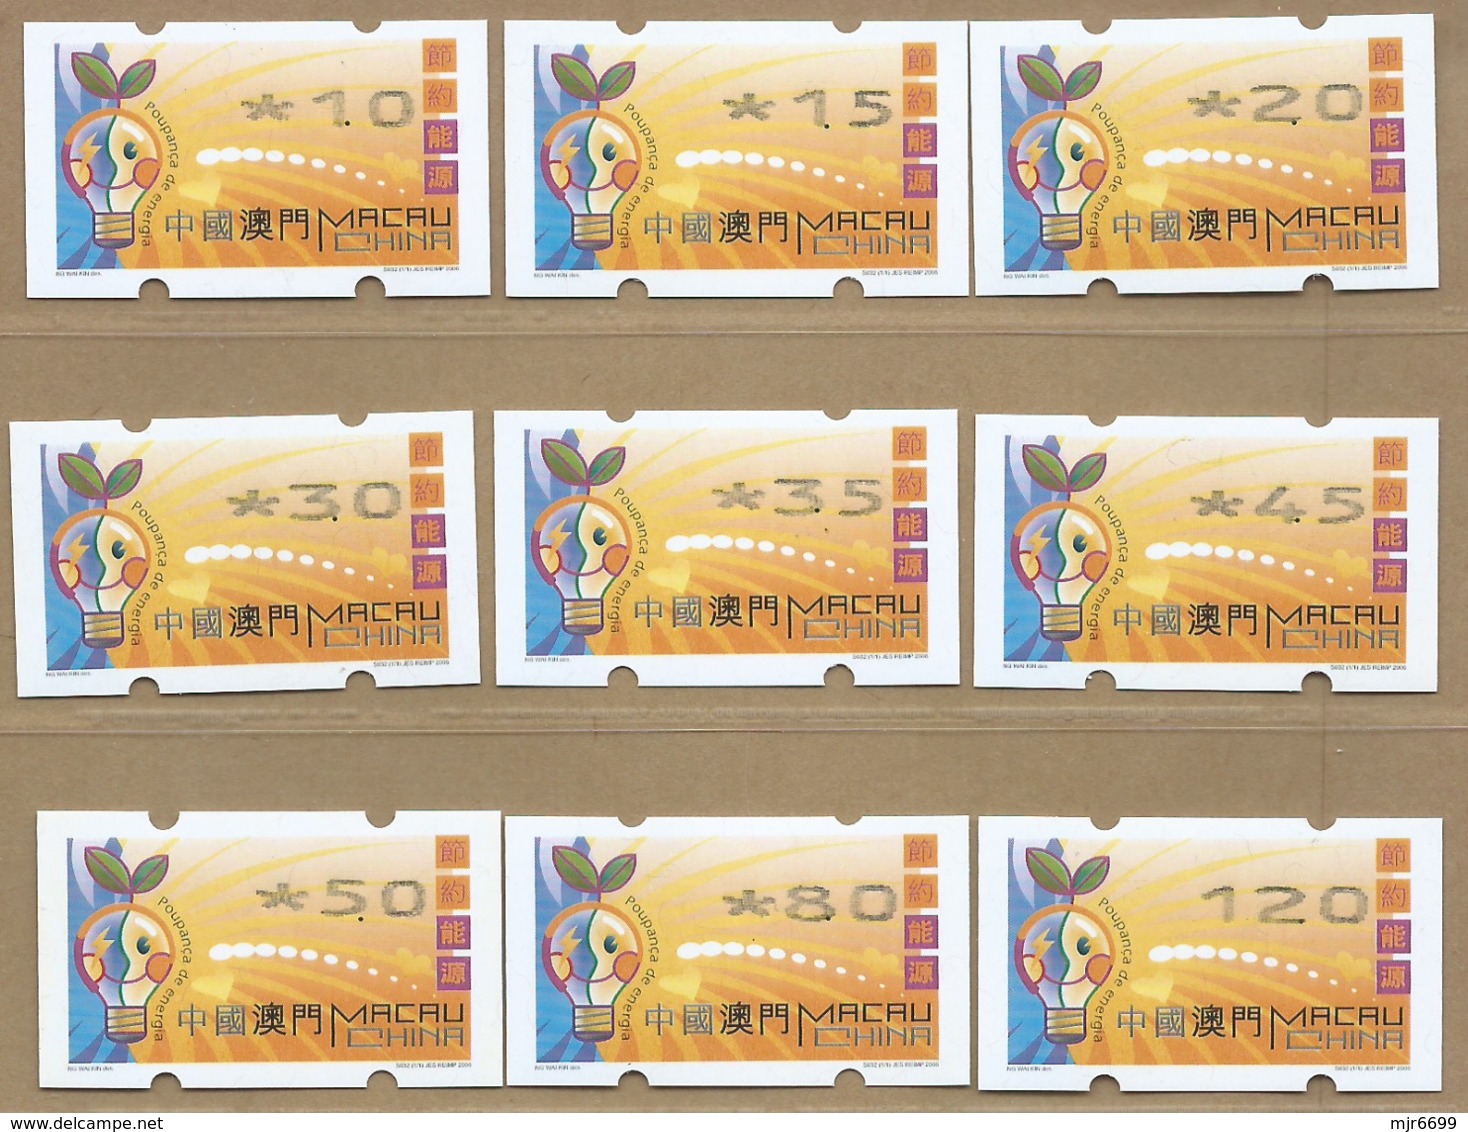 MACAU ENERGY SAVING 2006 ATM LABELS NAGLER N714 TYPE MACHINE SET OF 9, W\FIGURES SHIFTED RIGHT PRINT - Automatenmarken